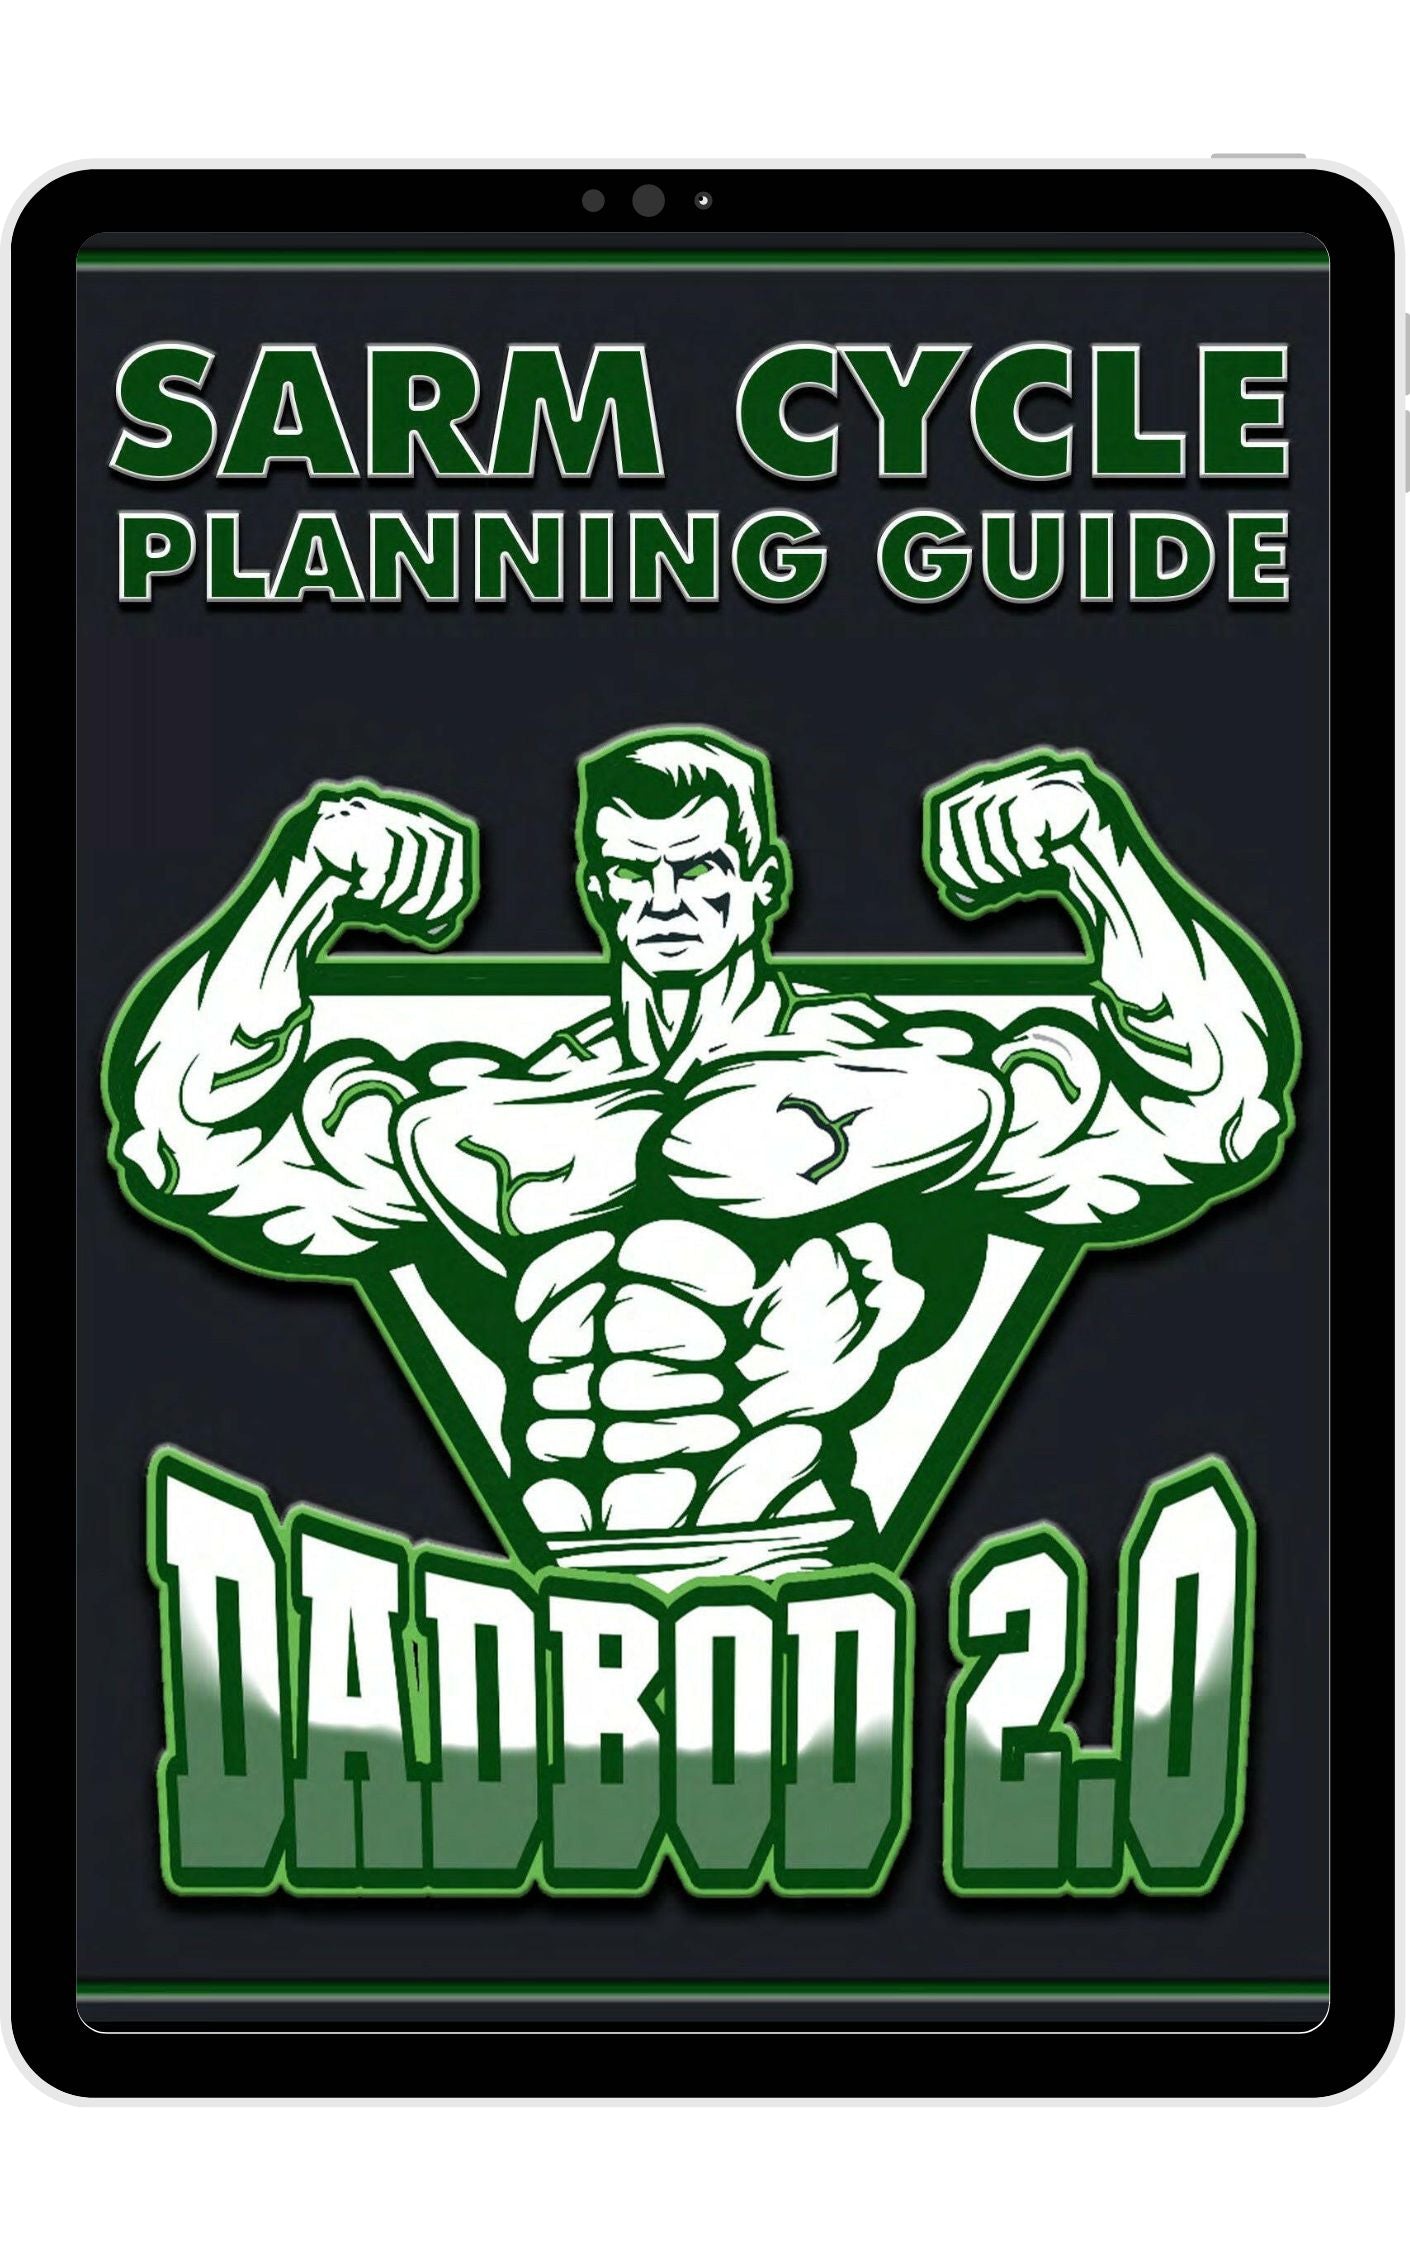 SARM Cycle Planning Guide